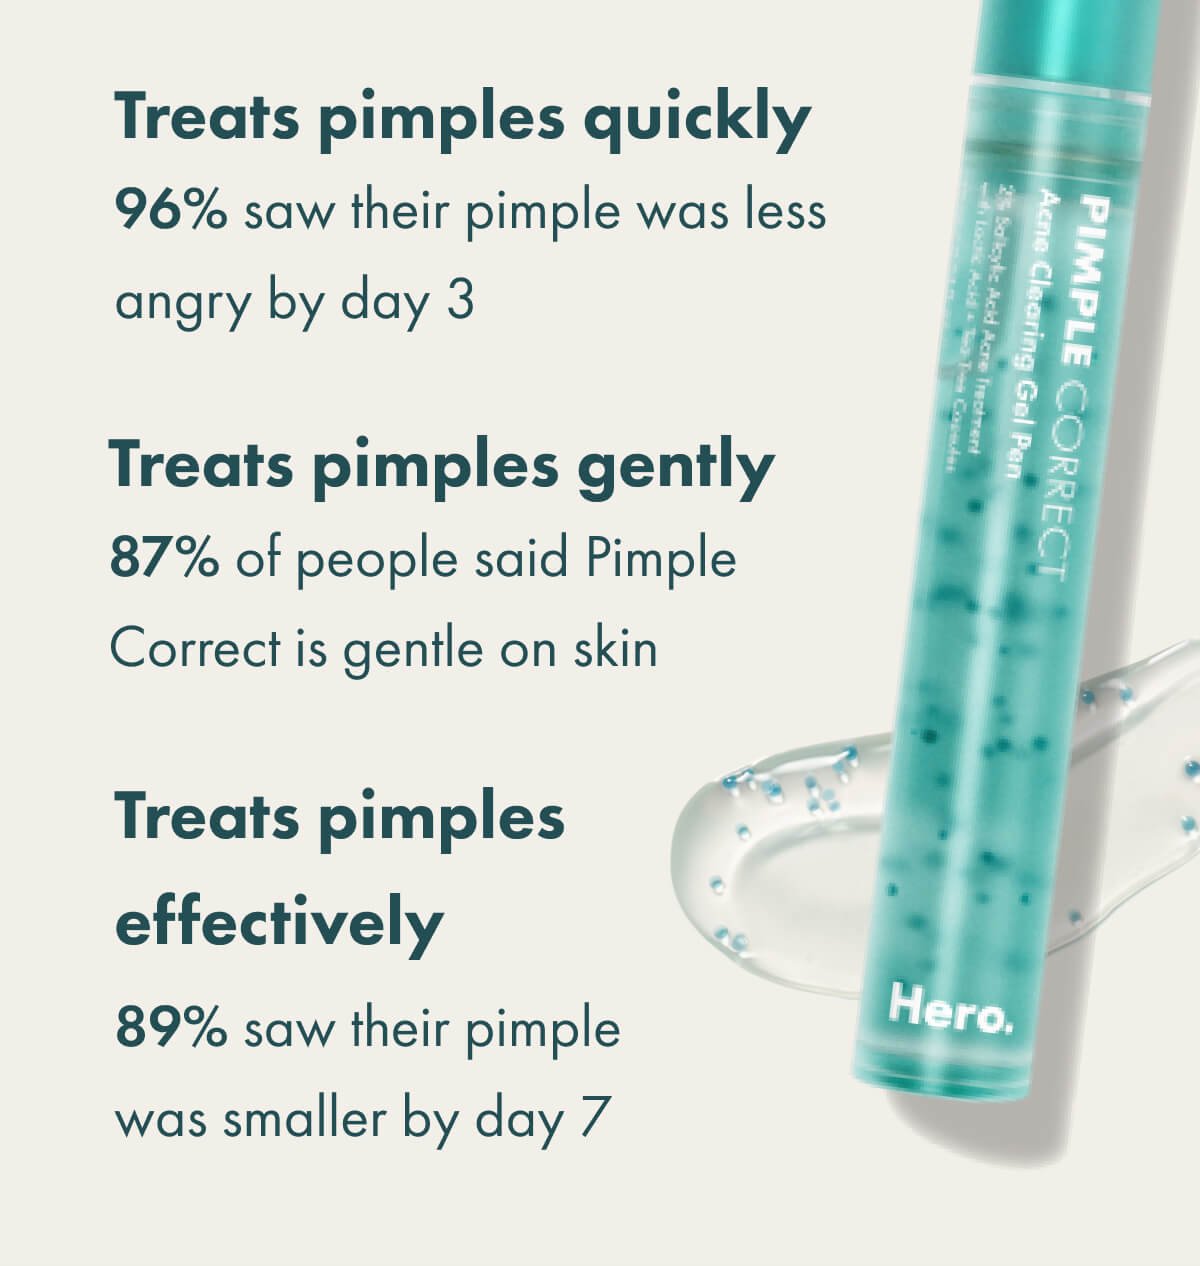 Treats pimples quickly, gently, and effectively